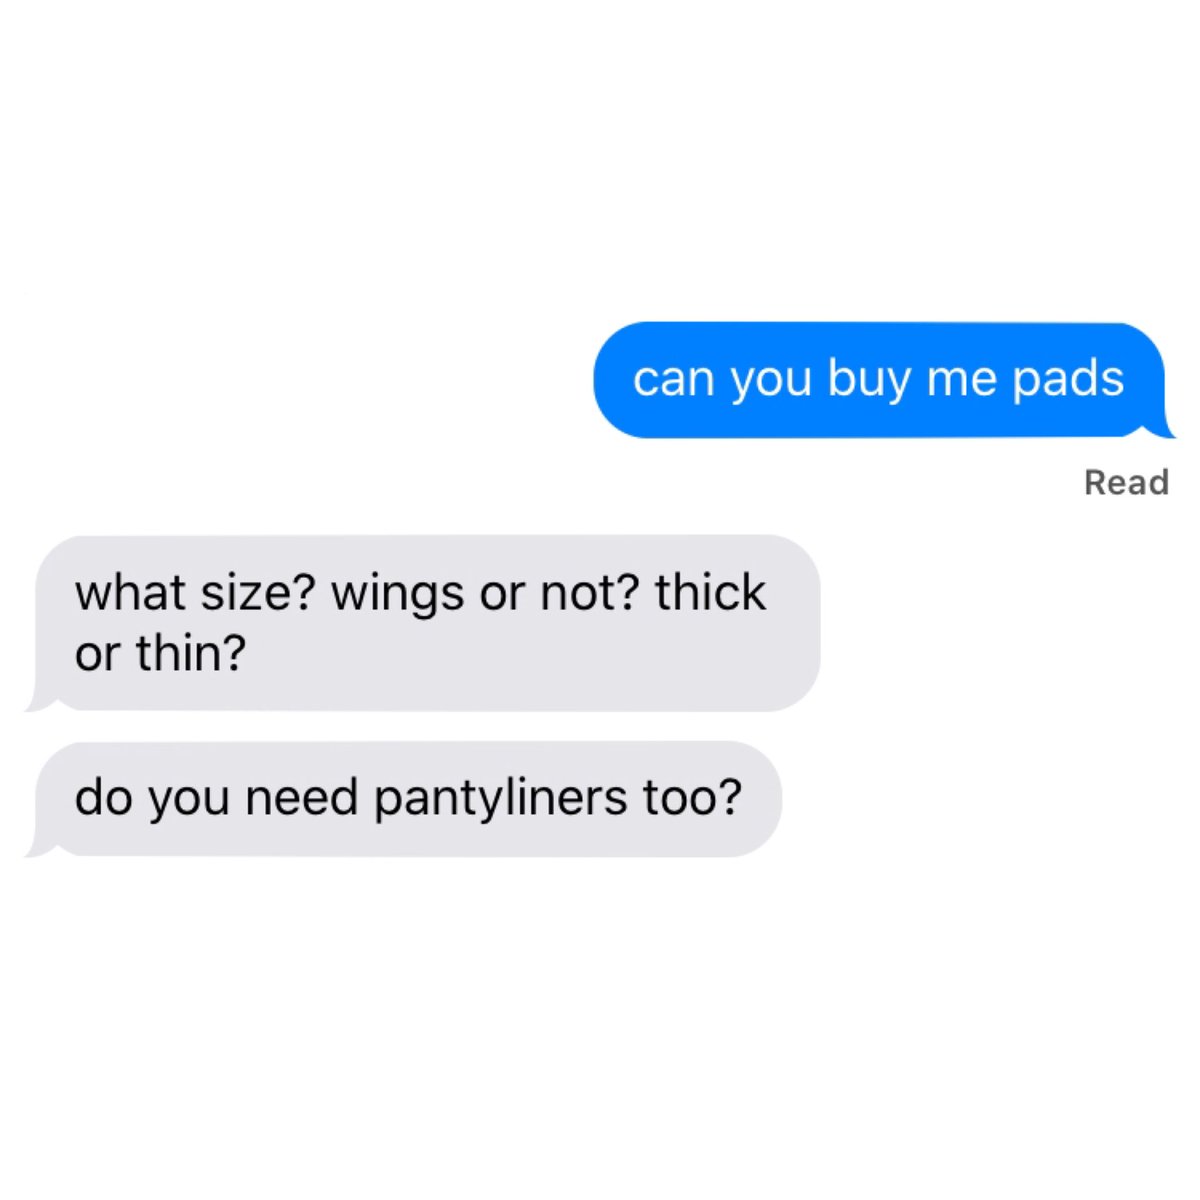 SHINee responding to "can you buy me pads" text — a thread...Jinki